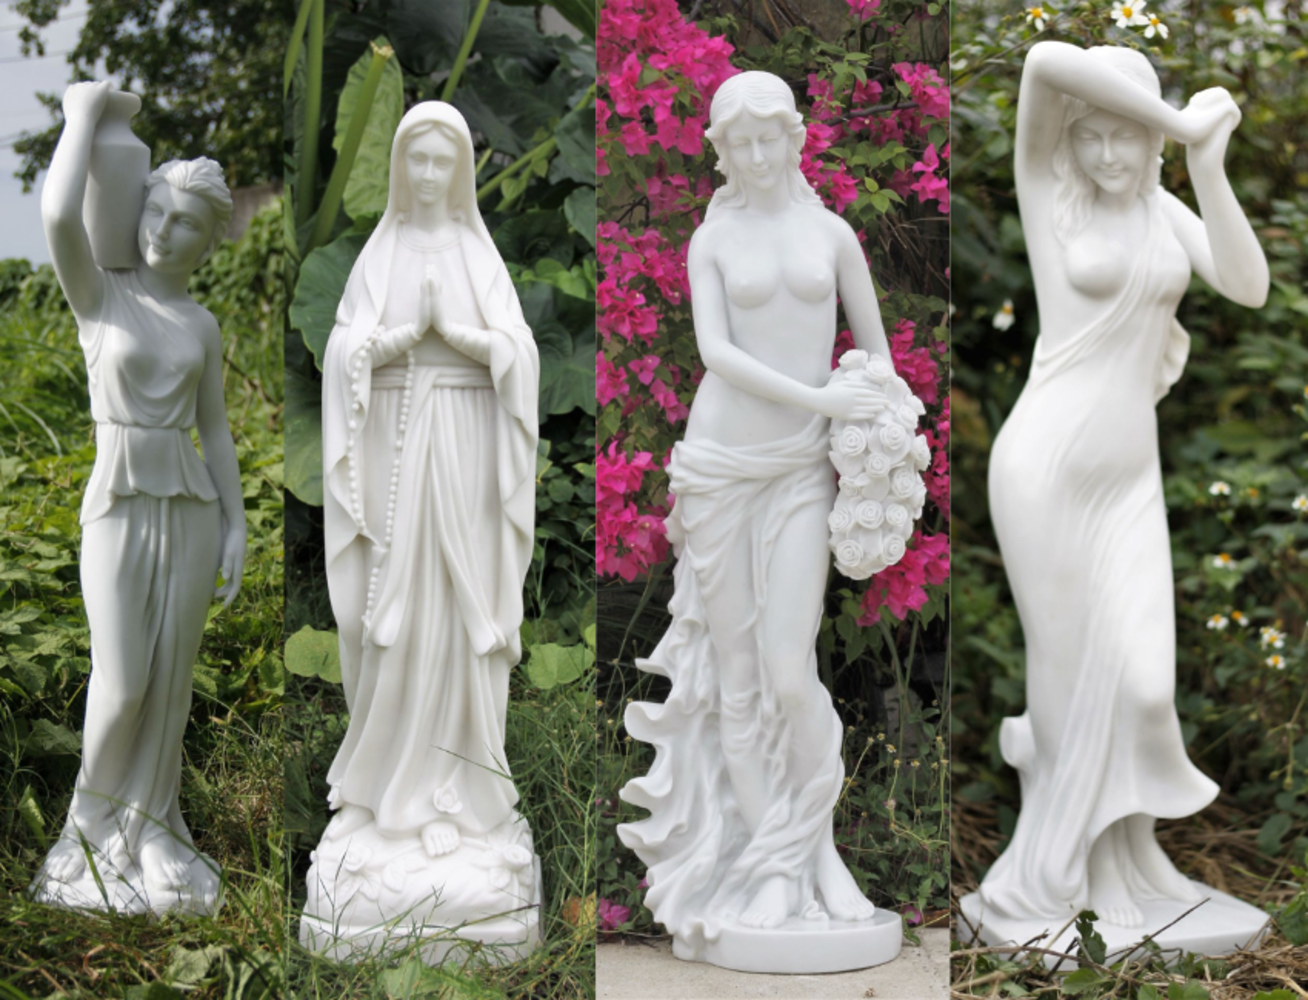 EXCLUSIVE WHOLESALE COLLECTION OF GARDEN ART STATUES / ORNAMENTS / SCULPTURES & LAUREL HEDGING PLANTS! SALE Ends Monday 4th December From 1pm!